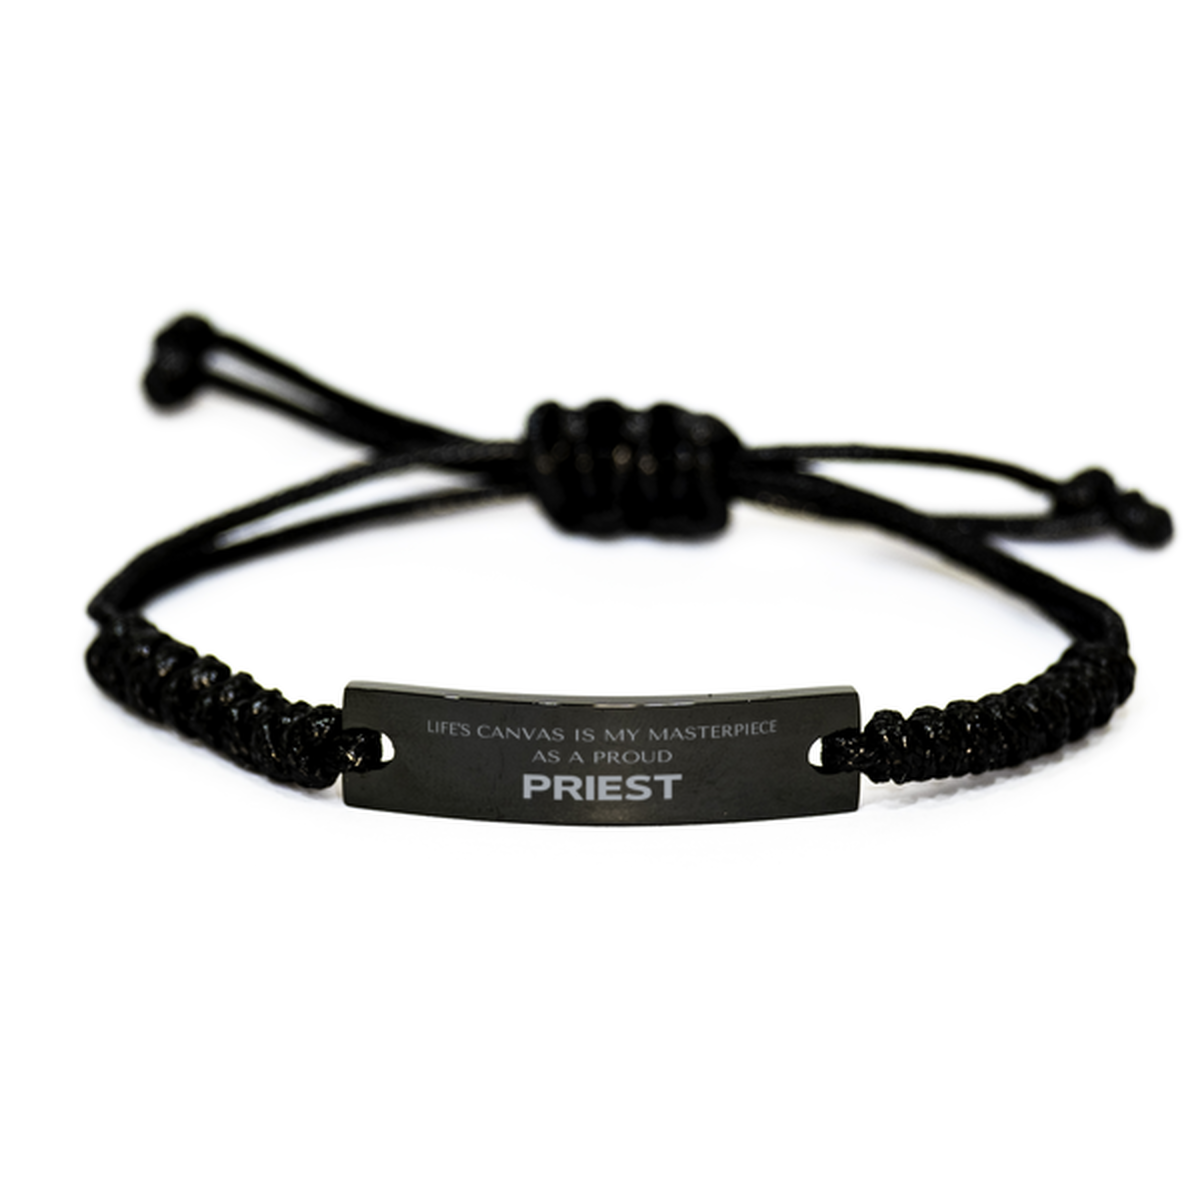 Proud Priest Gifts, Life's canvas is my masterpiece, Epic Birthday Christmas Unique Black Rope Bracelet For Priest, Coworkers, Men, Women, Friends